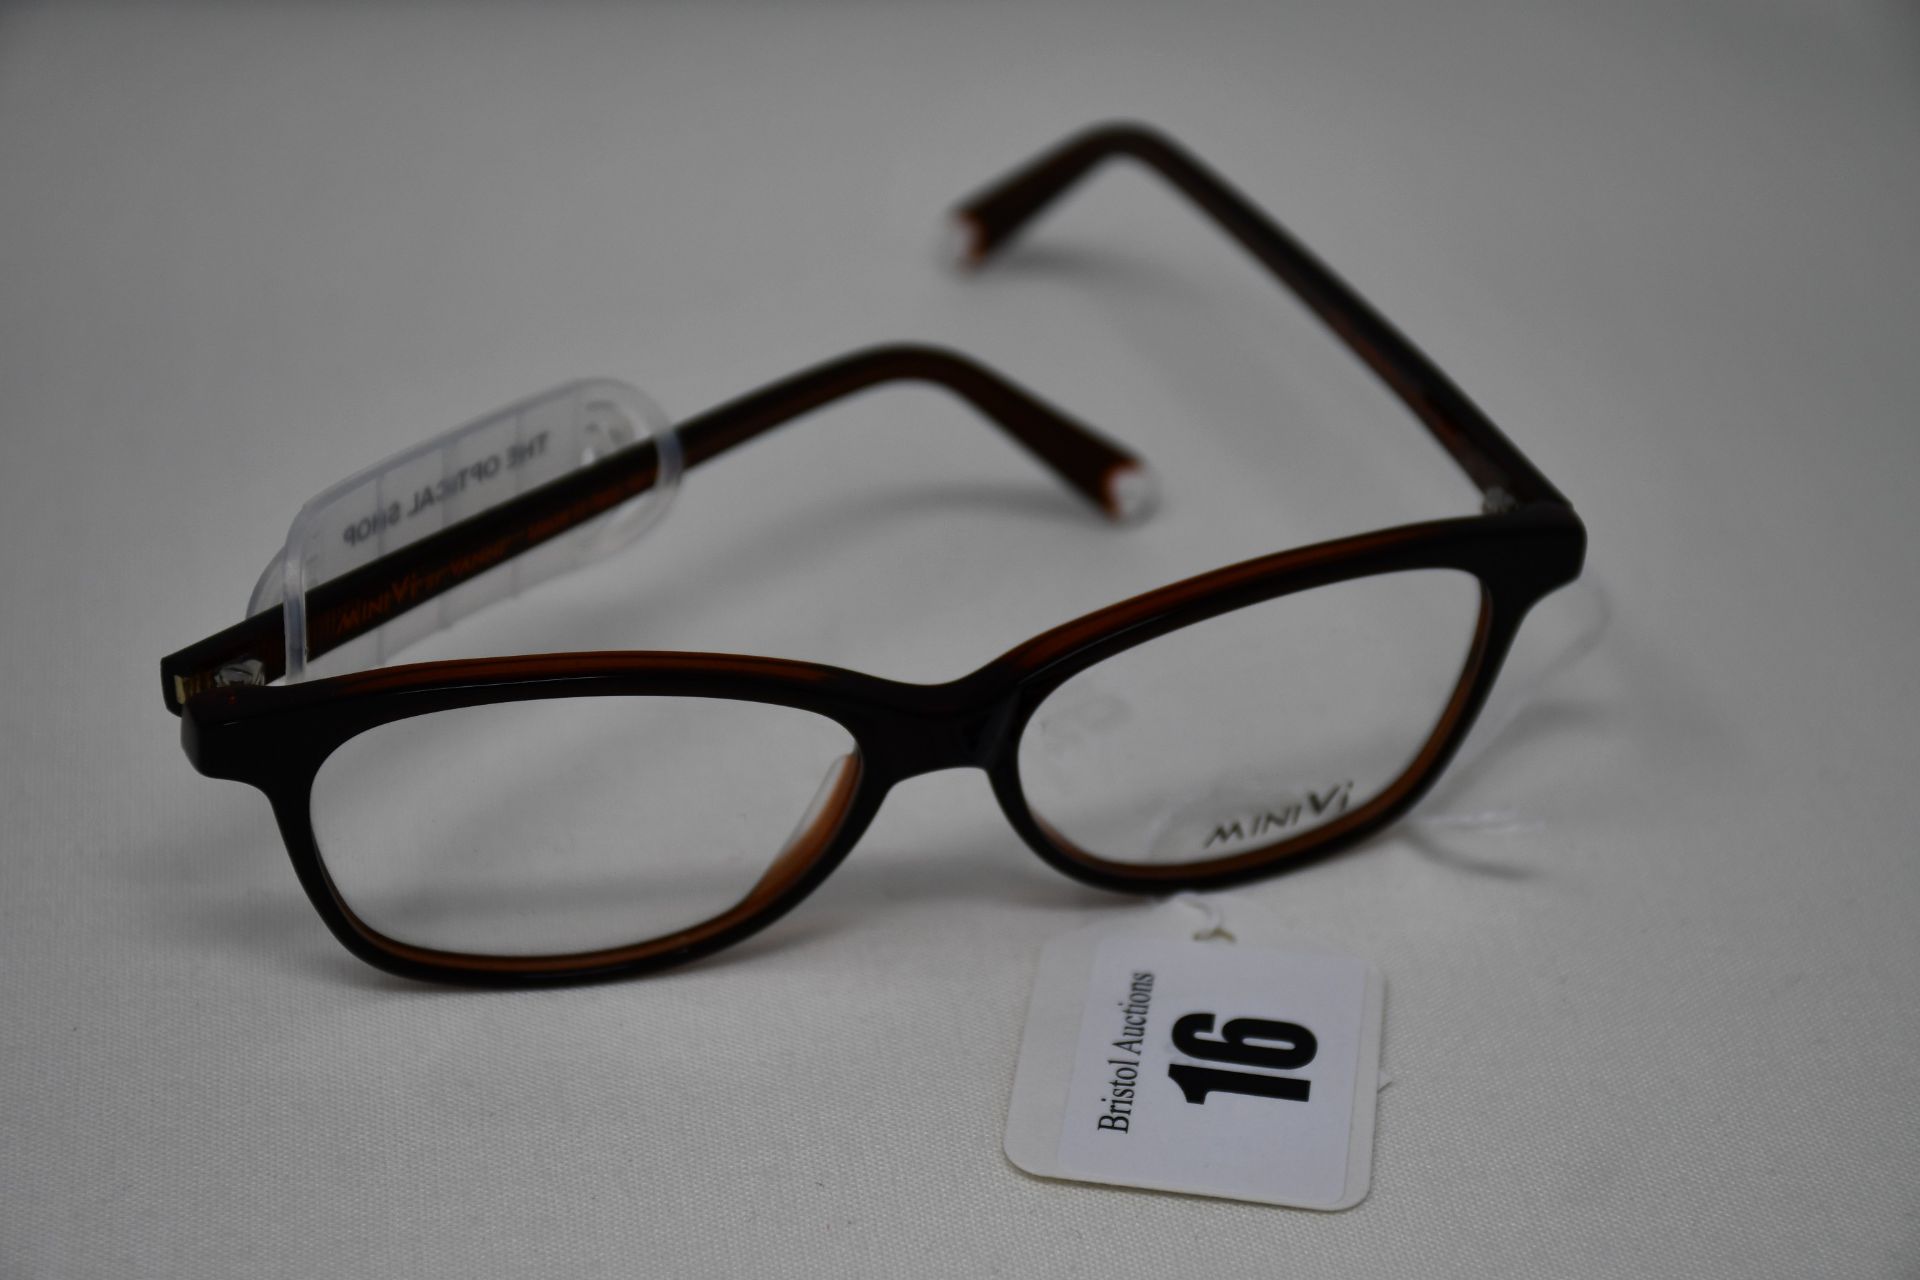 A pair of as new MiniVi glasses frames with clear glass (RRP £240).